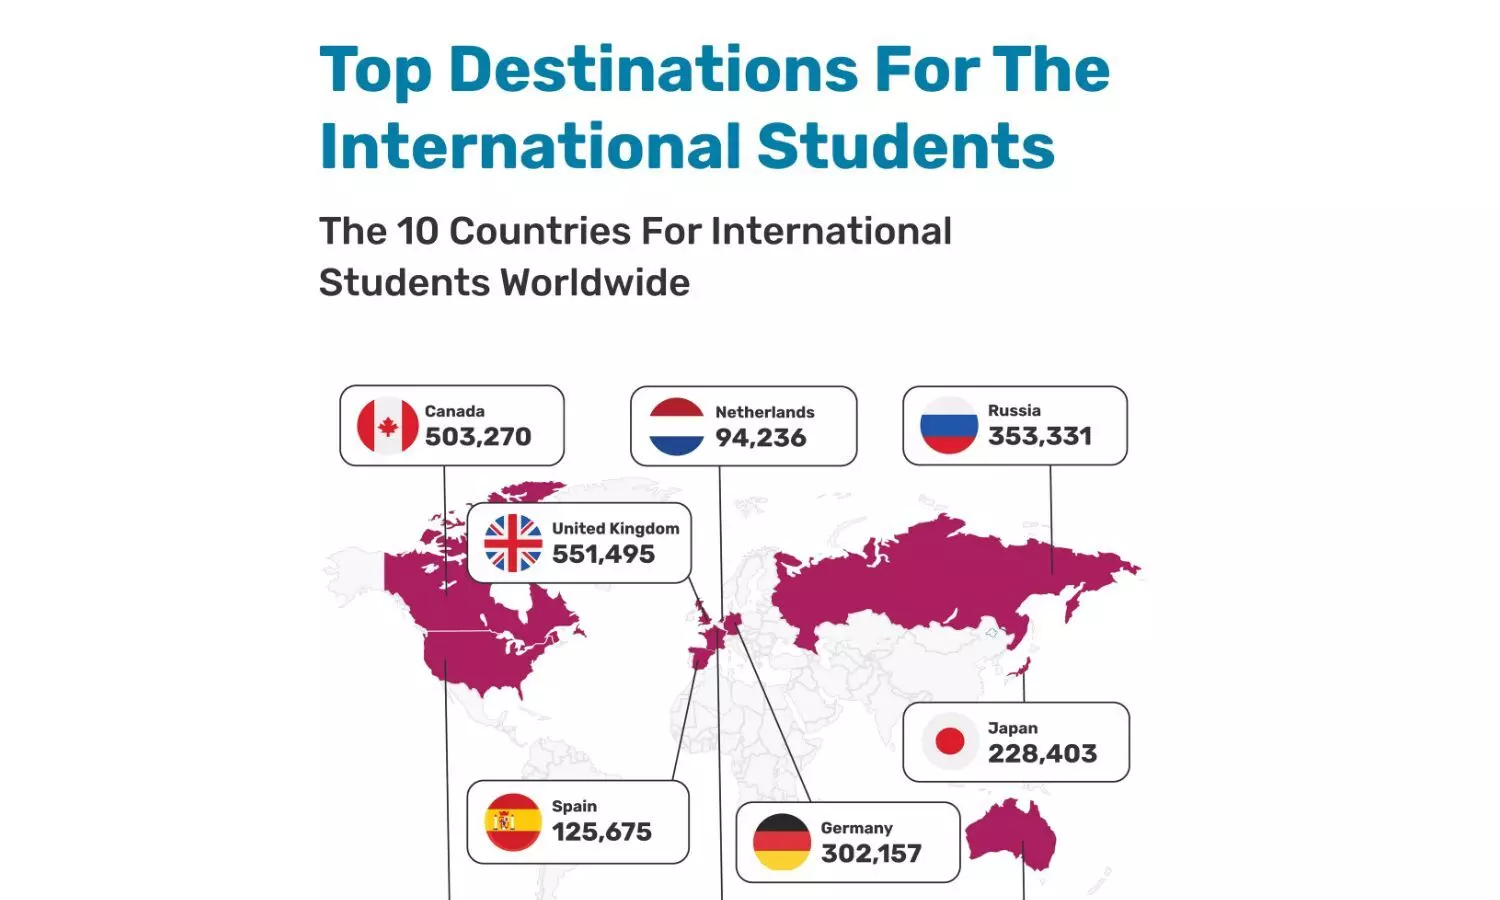 Top Destinations for International Students